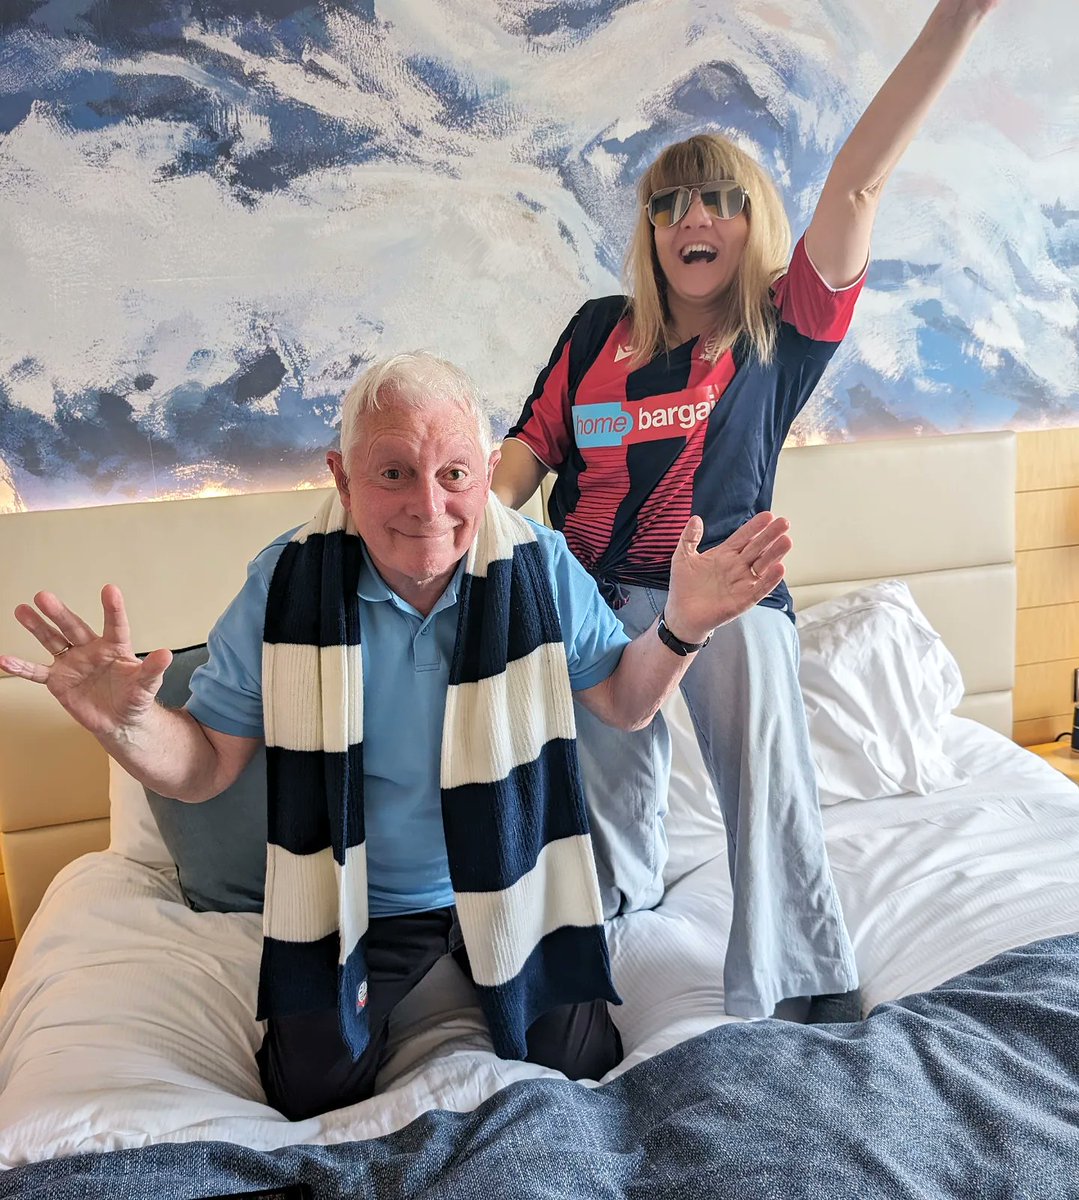 4 days ago, Dad was back in hospital. 

We weren't sure what was gonna happen, but he came out in time to see #Bolton in the Playoff Final. 

Horrible to lose at Wembley. But we were in front of the telly watching it, together.

Every match with him next to me is precious.

#BWFC